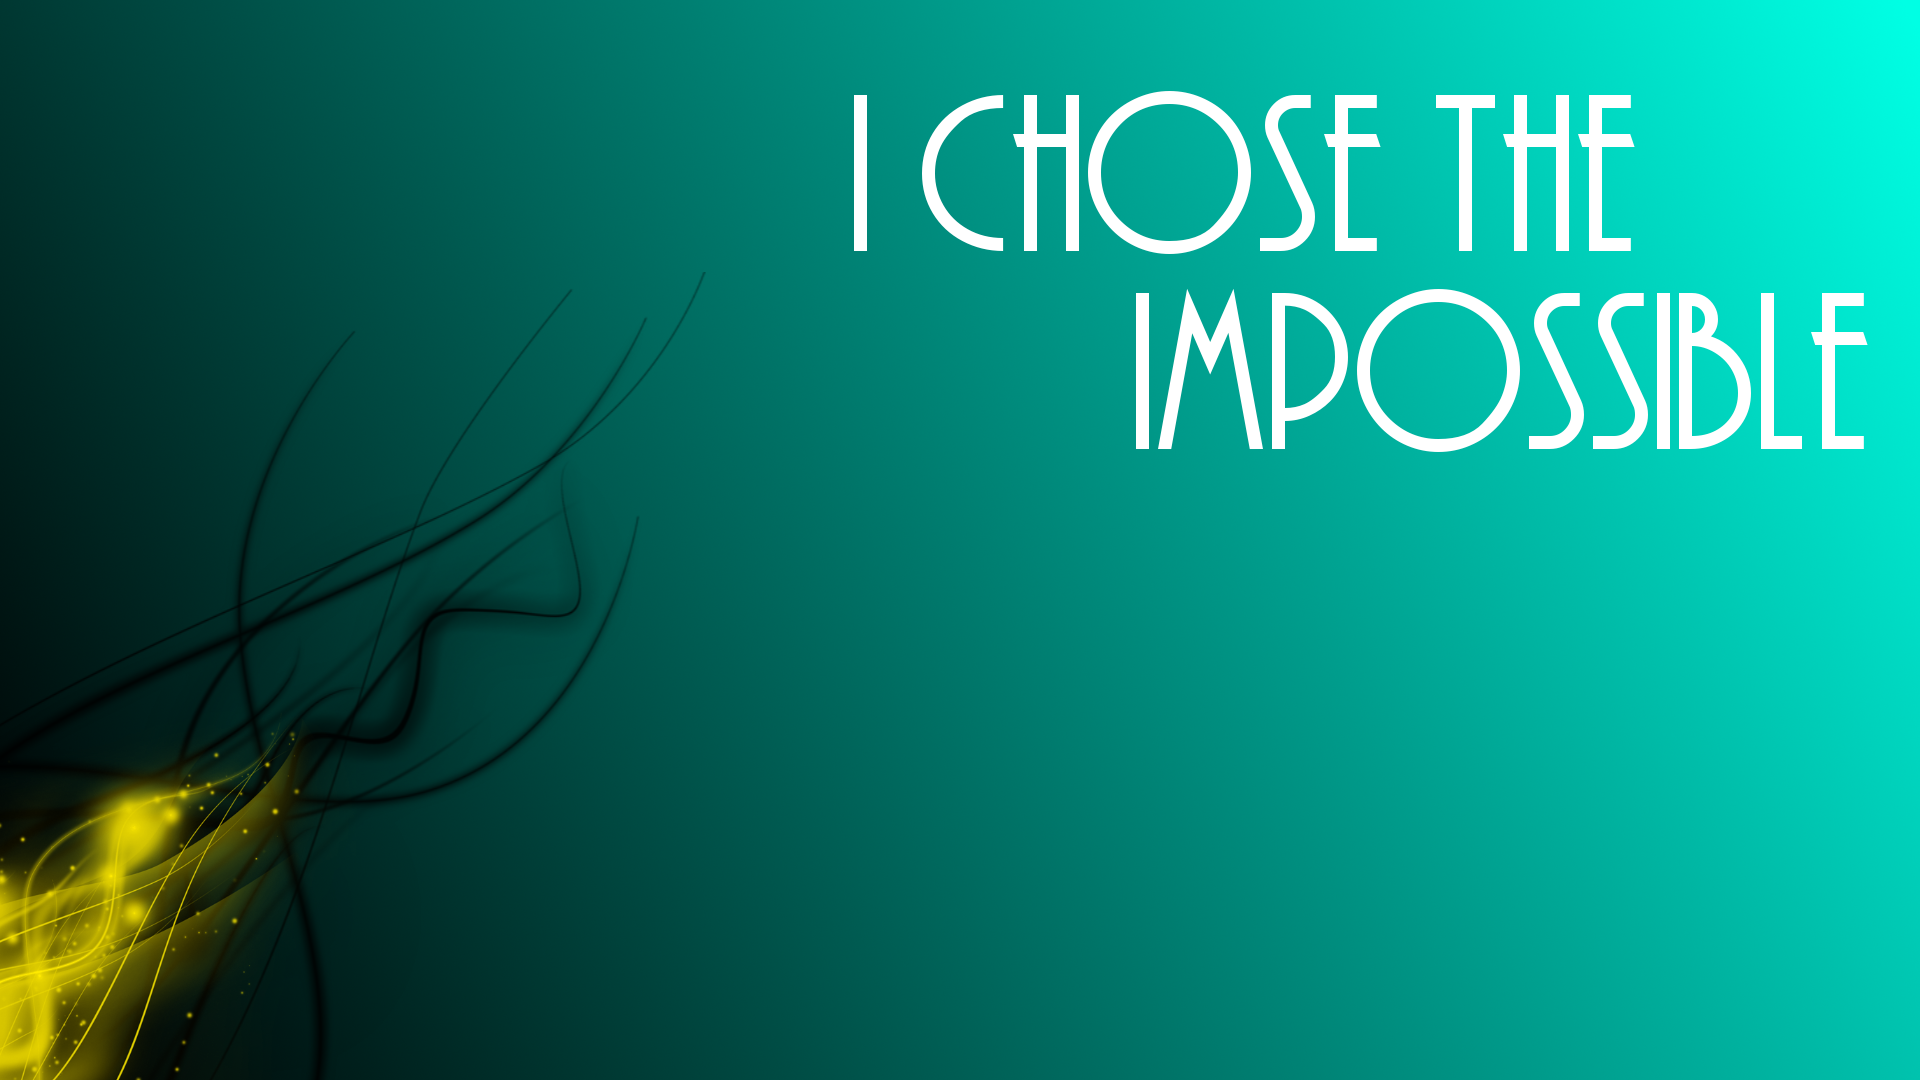 I chose the impossible. Another wallpaper I did inspired by